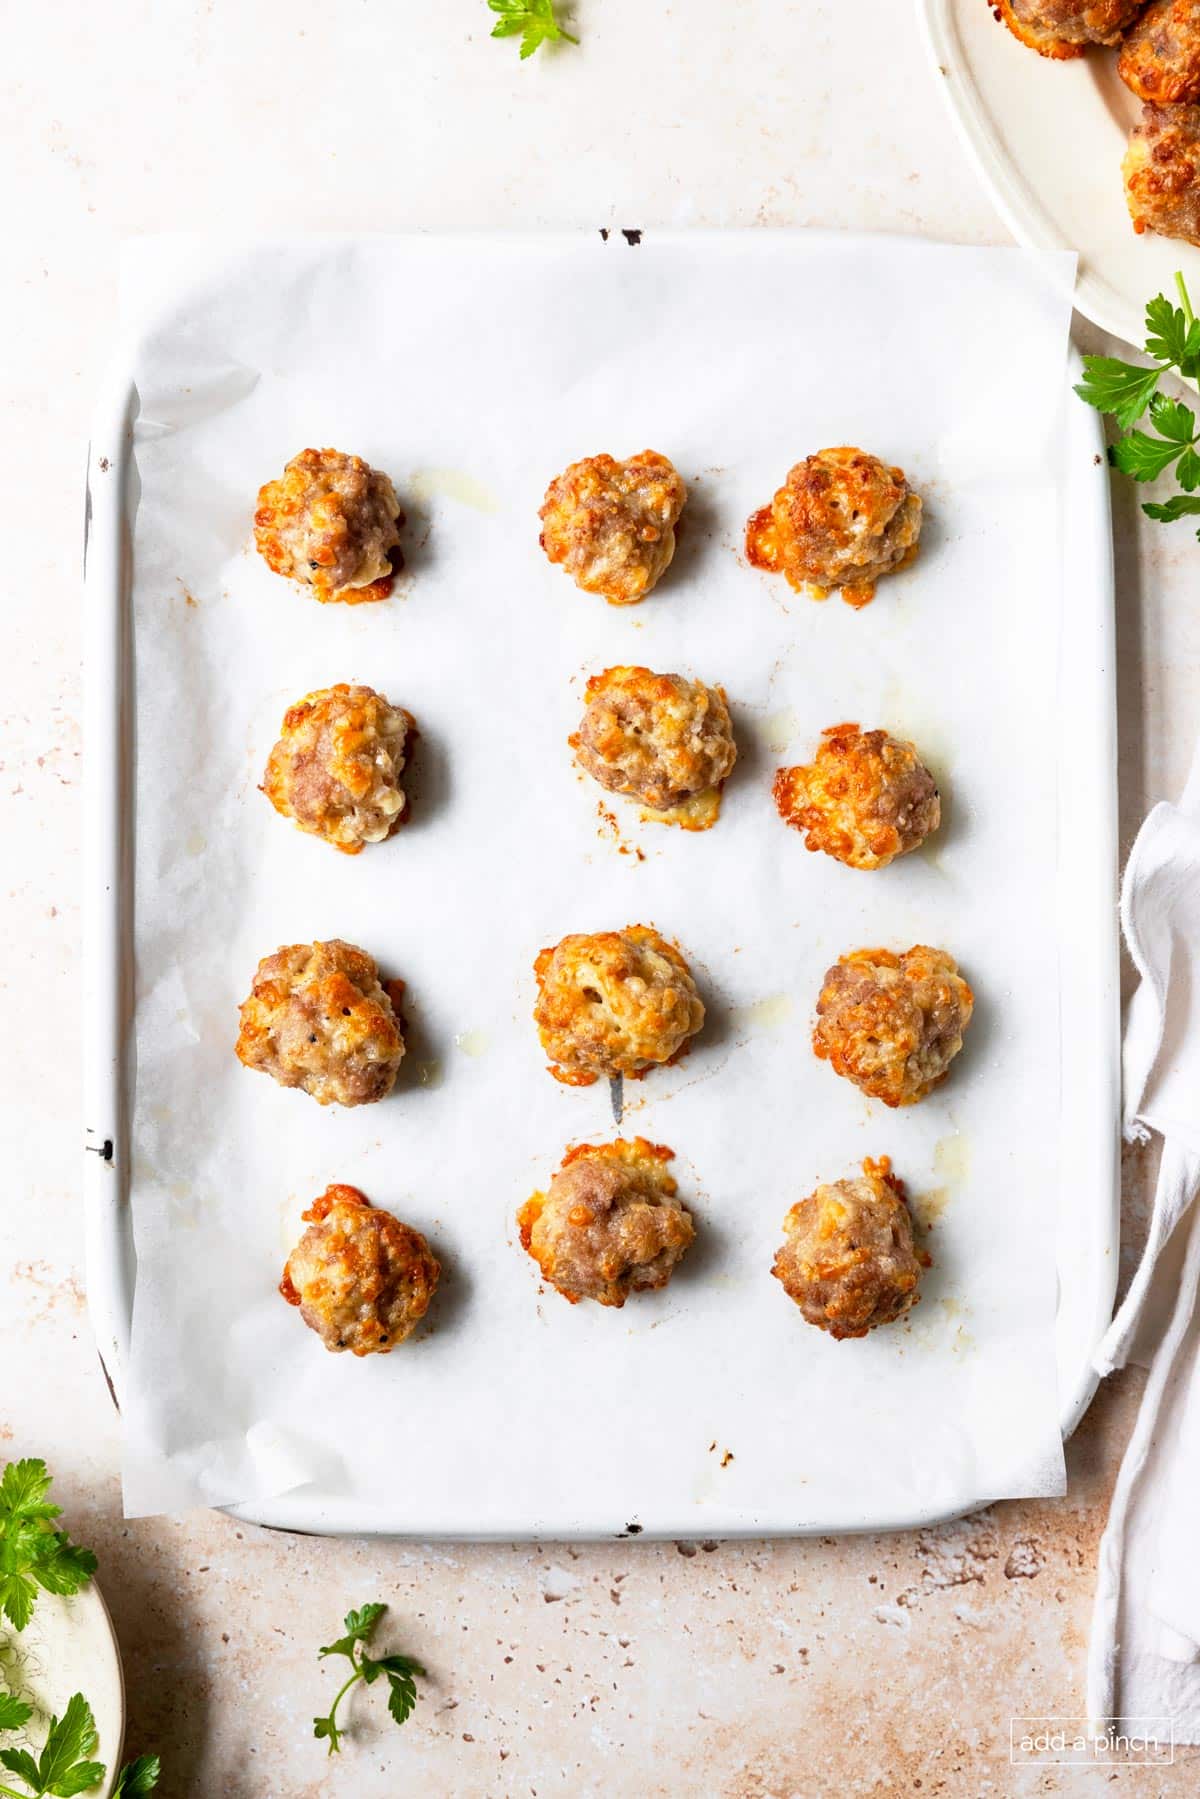 Overhead image of baked sausage balls on a parchment lined baking sheet.